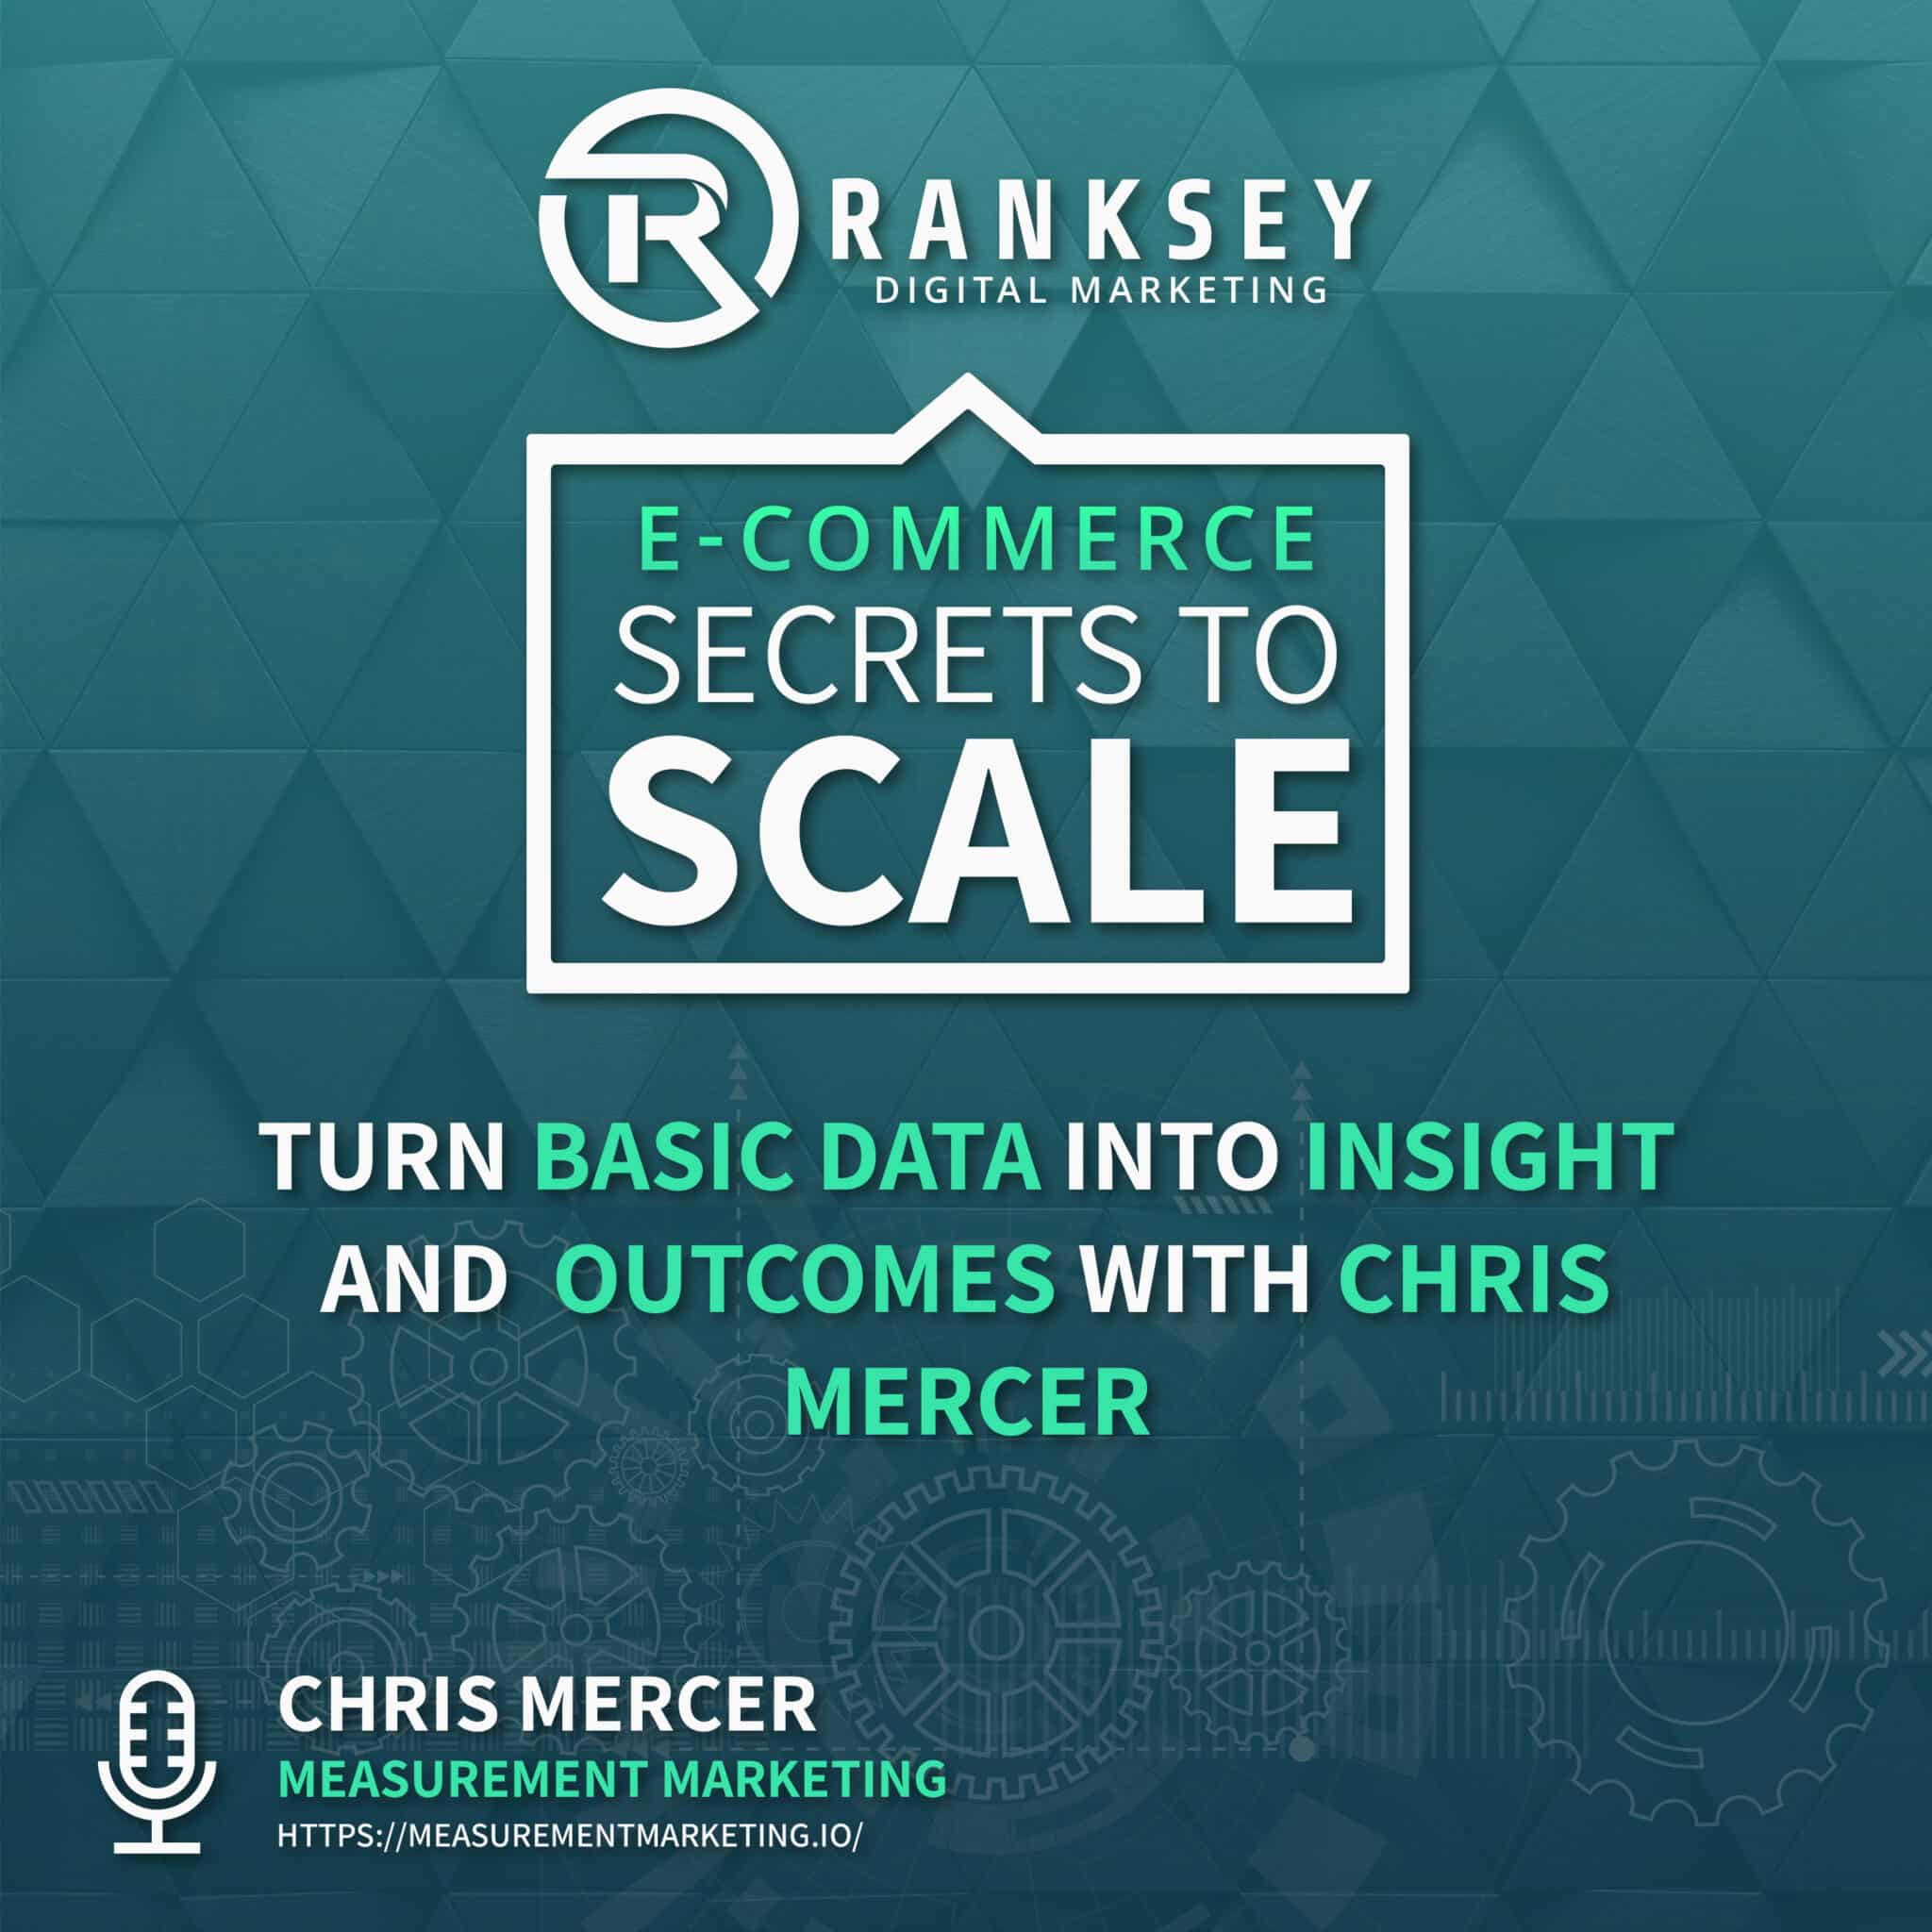 093 Turn Basic Data into Insight and Outcomes scaled